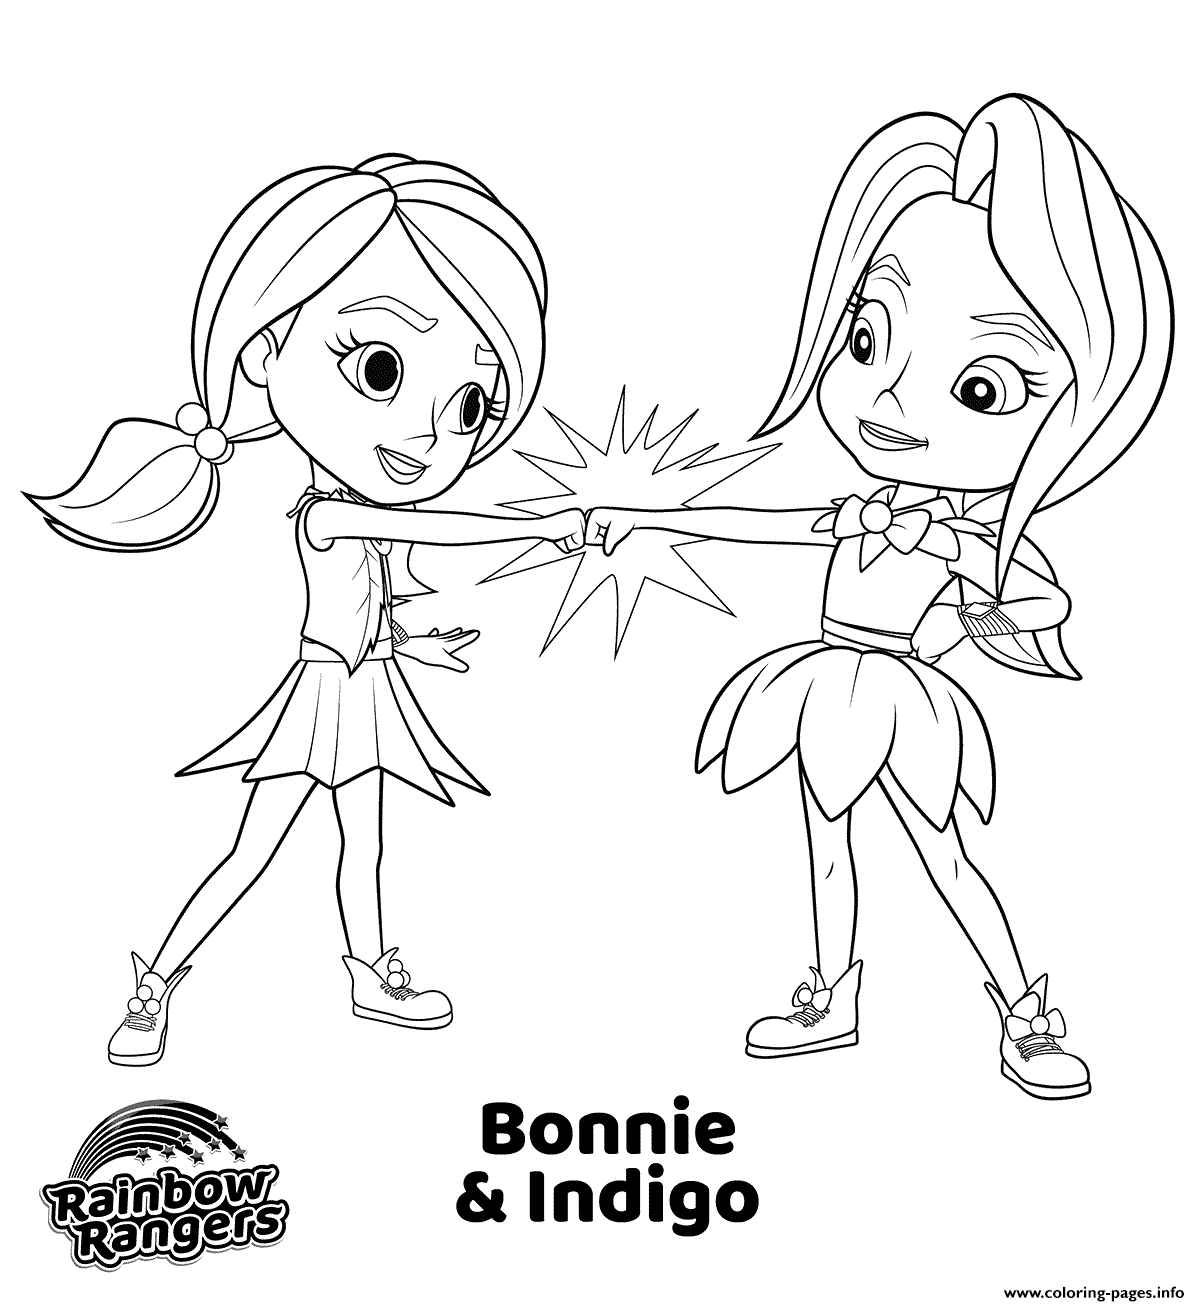 BFF From Rainbow Rangers Coloring Pages Printable